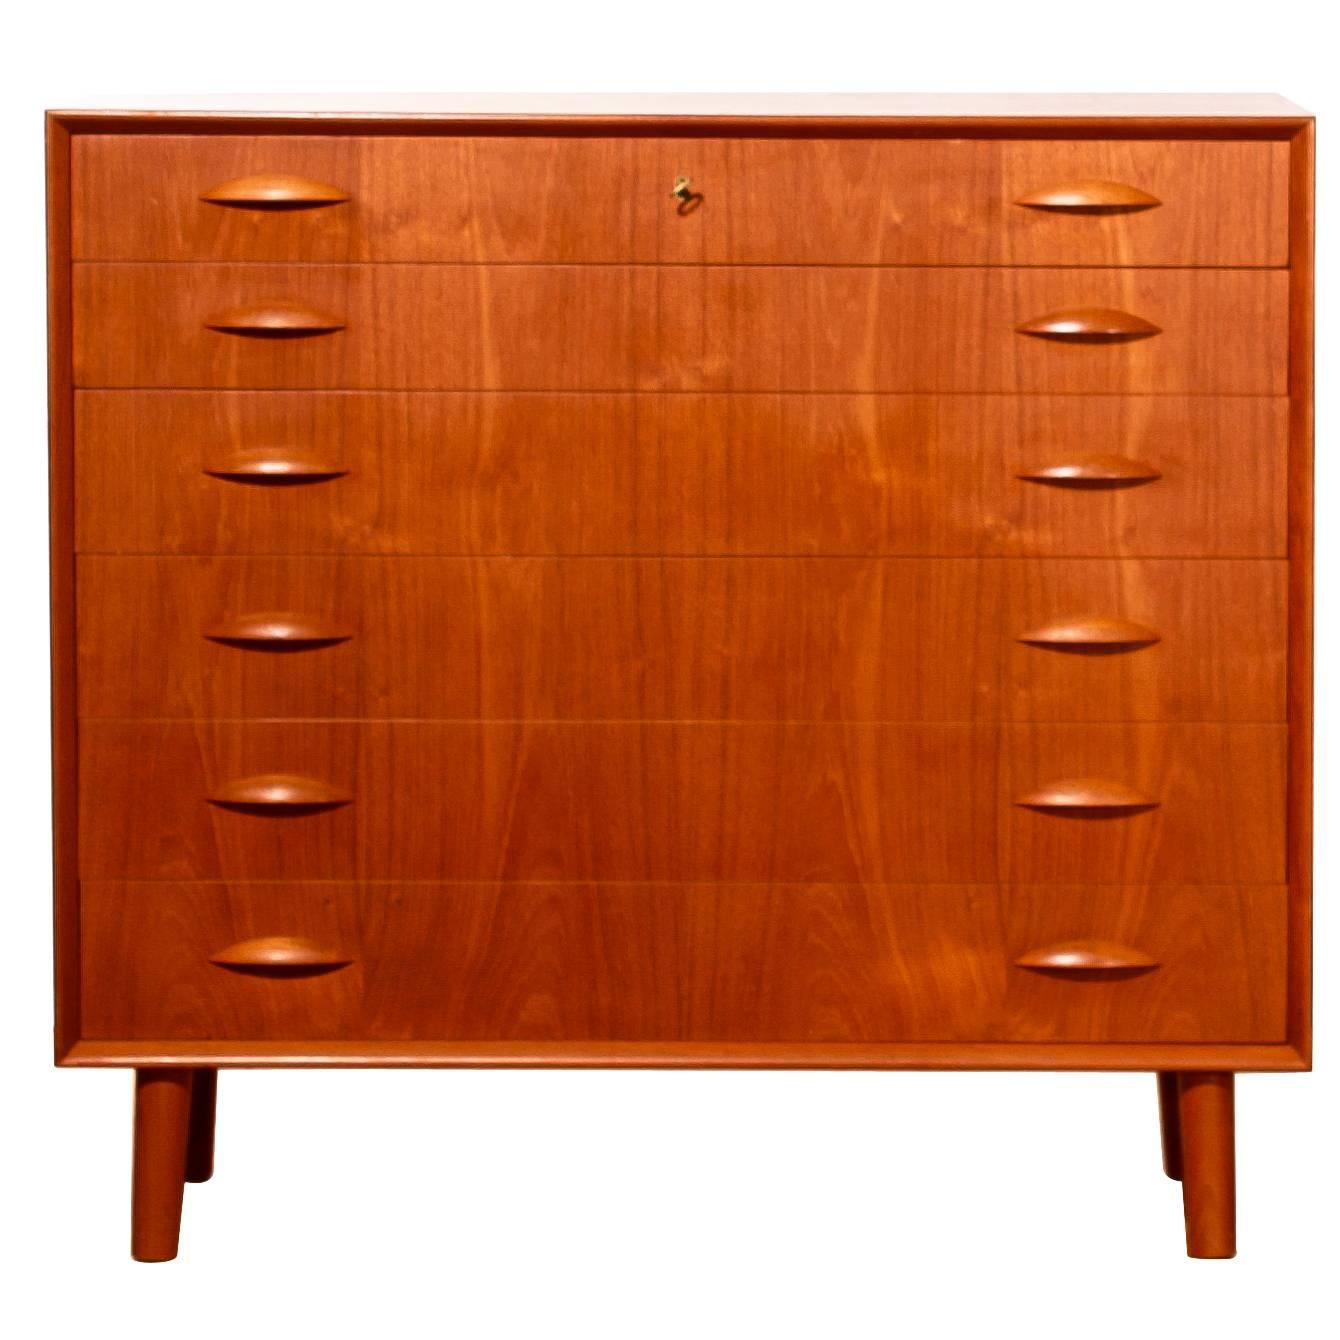 Beautiful cabinet in teak designed by Johannes Sorth and produced by Nexø Møbelfabrik.
This sideboard has six drawers and is in a excellent condition.
The original key included.
Period 1960s.
Dimensions: H 92 cm, W 100 cm, D 45 cm.

